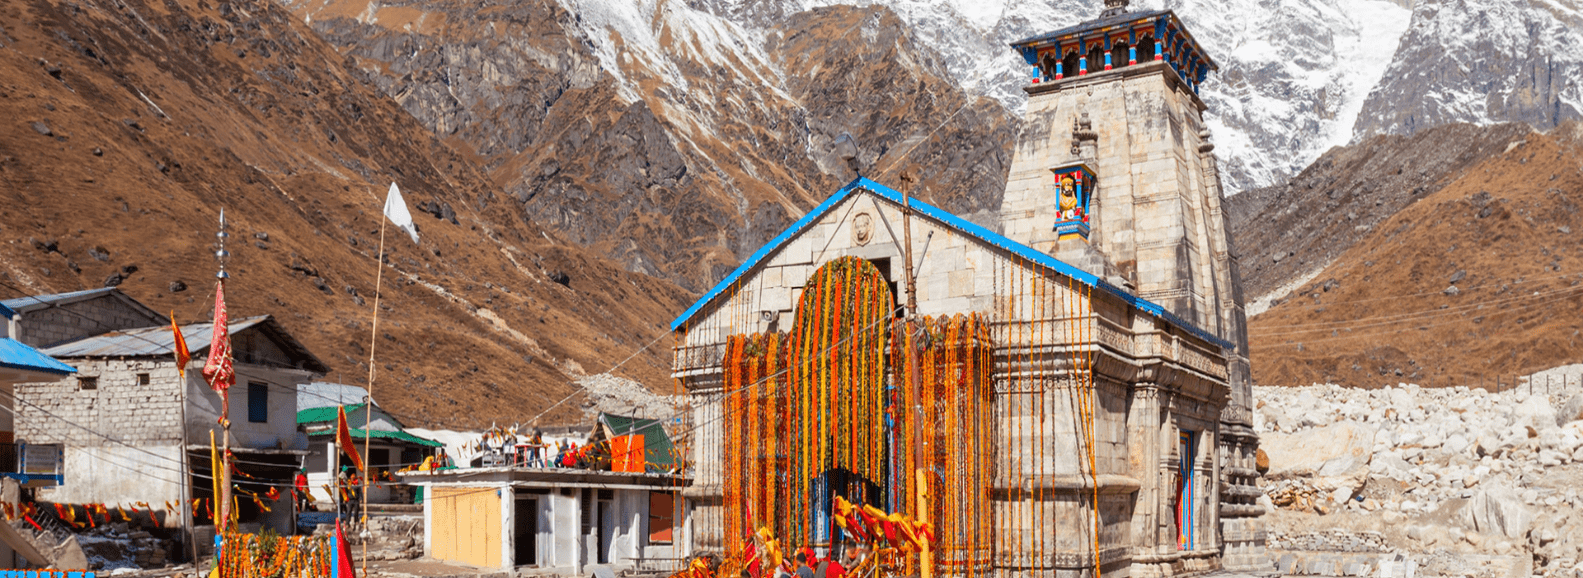 Kedarnath temple during Char Dham Yatra is one of the 12 Jyotirlingas in india and is a famous Lord Shiva temple